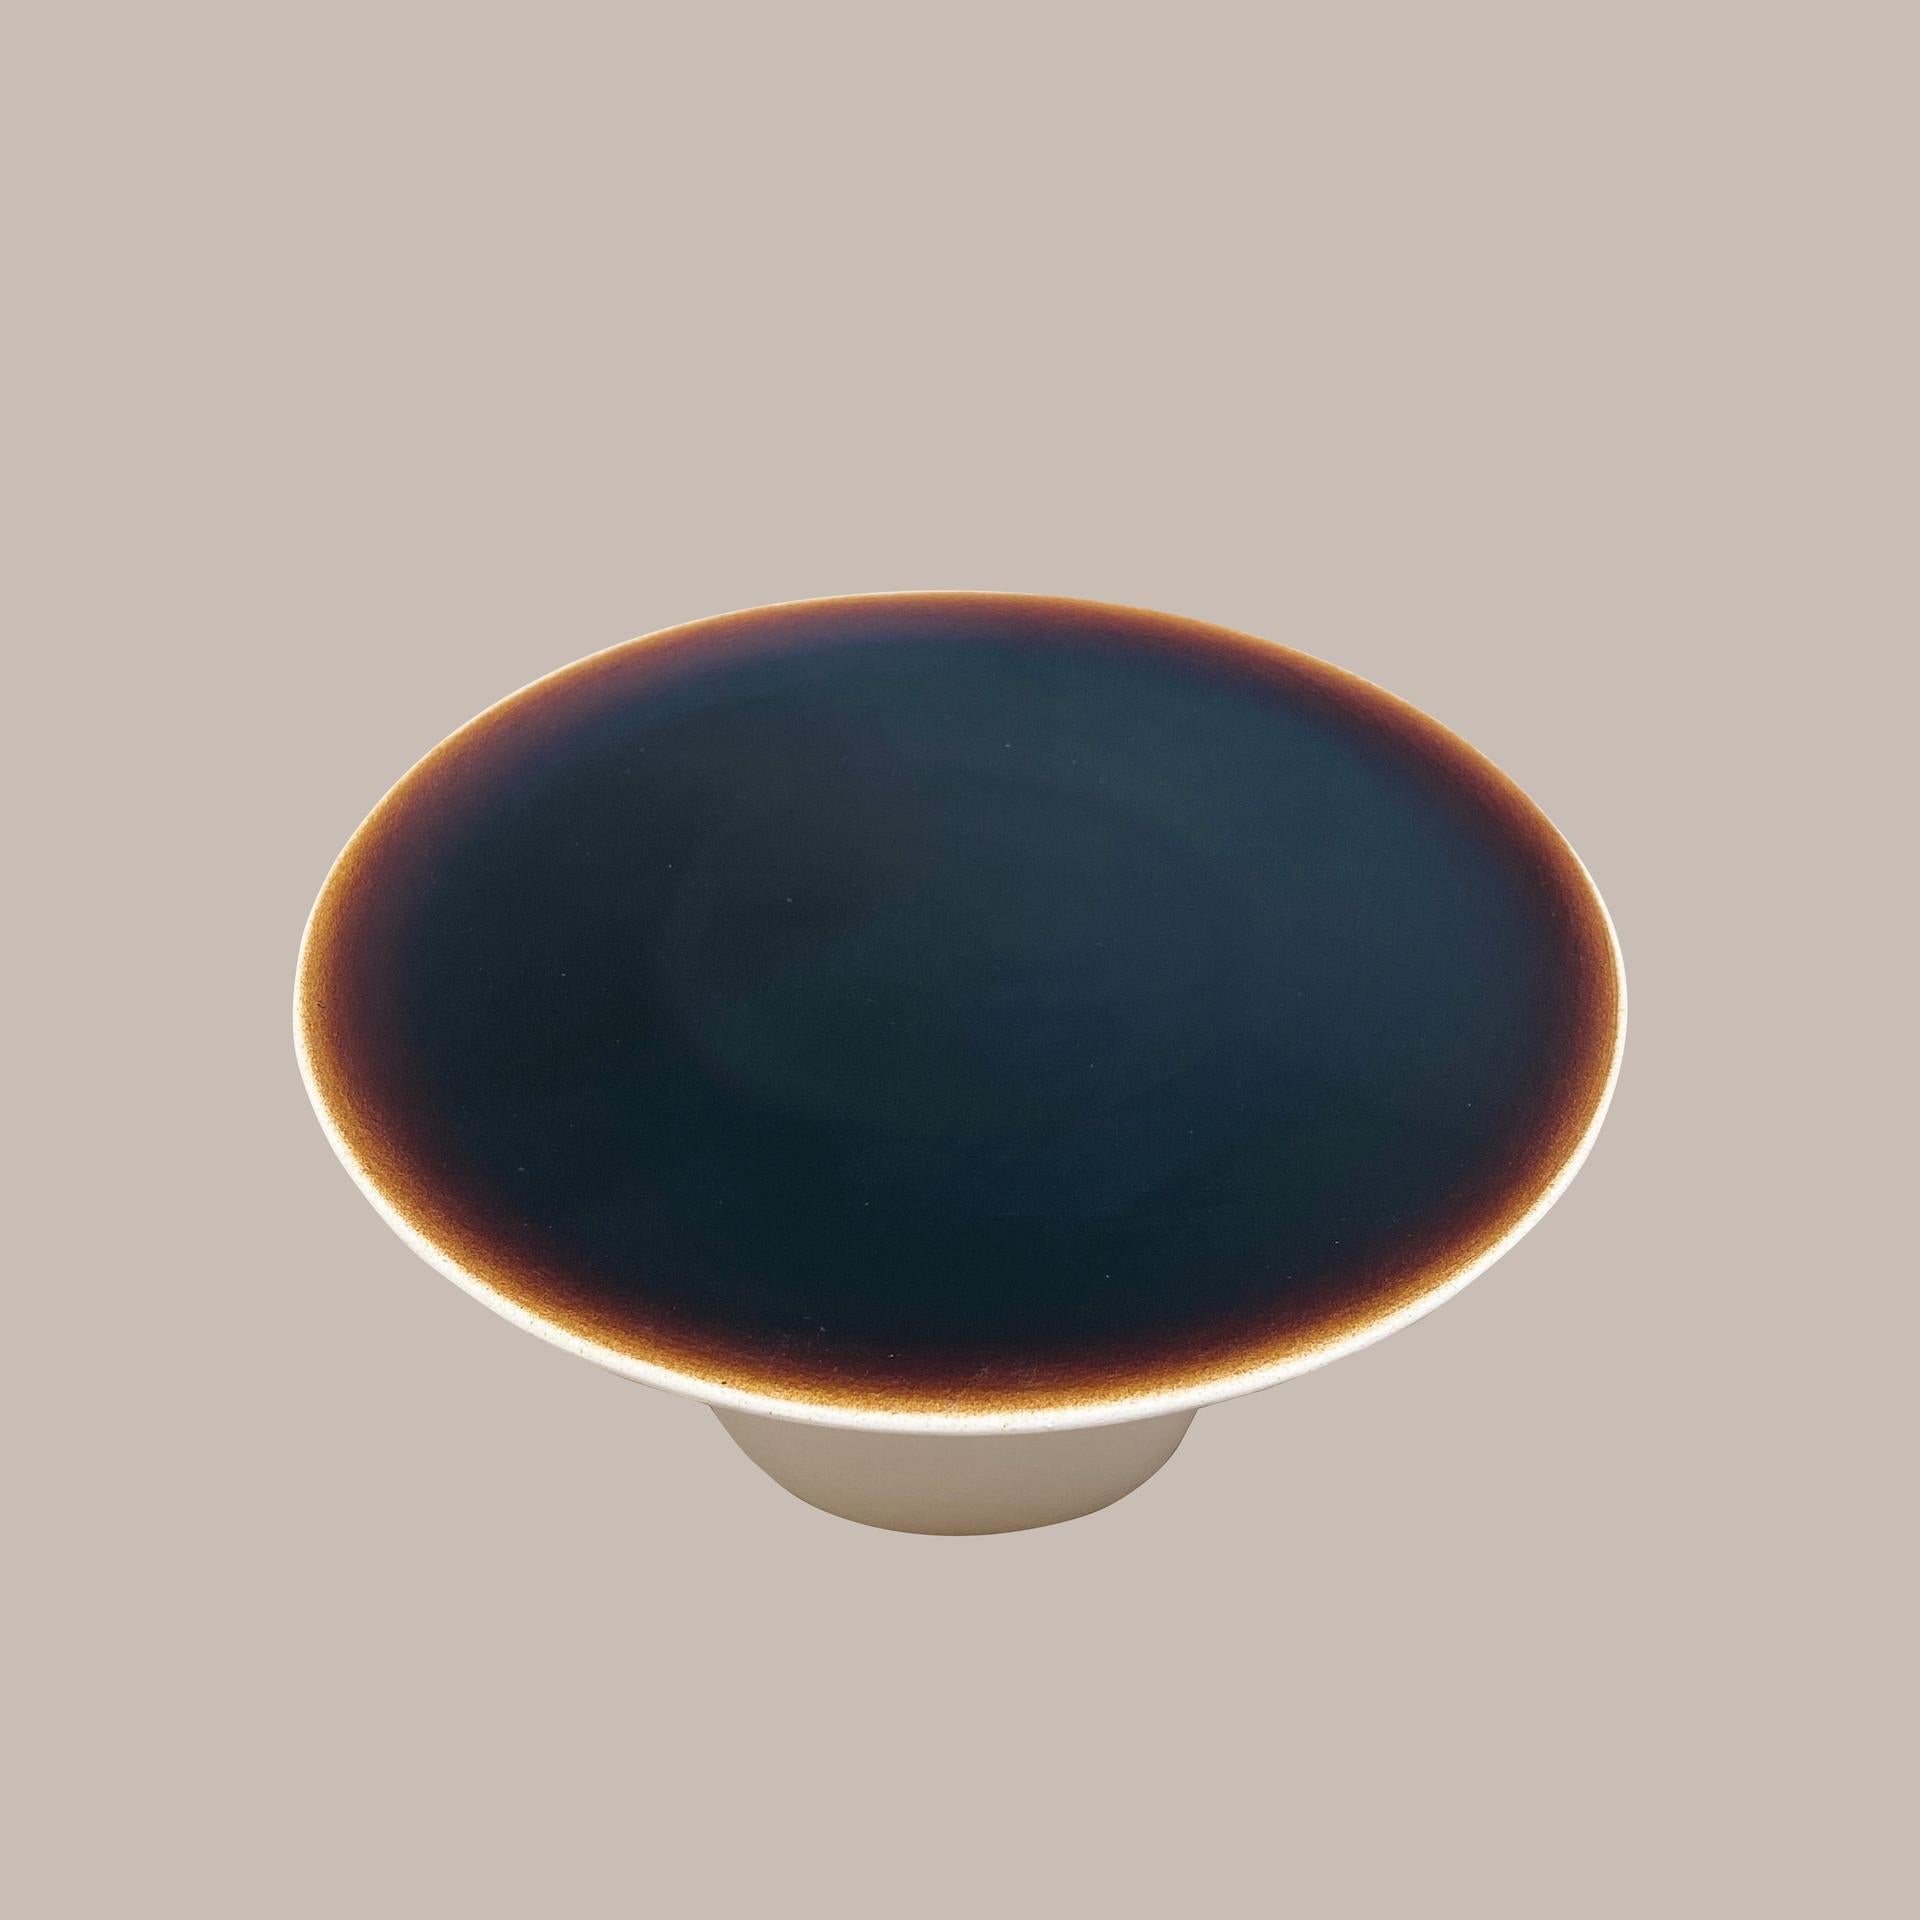 Porcelain Ott Another Paradigmatic Handmade Ceramic Cup by Studio Yoon Seok-Hyeon For Sale